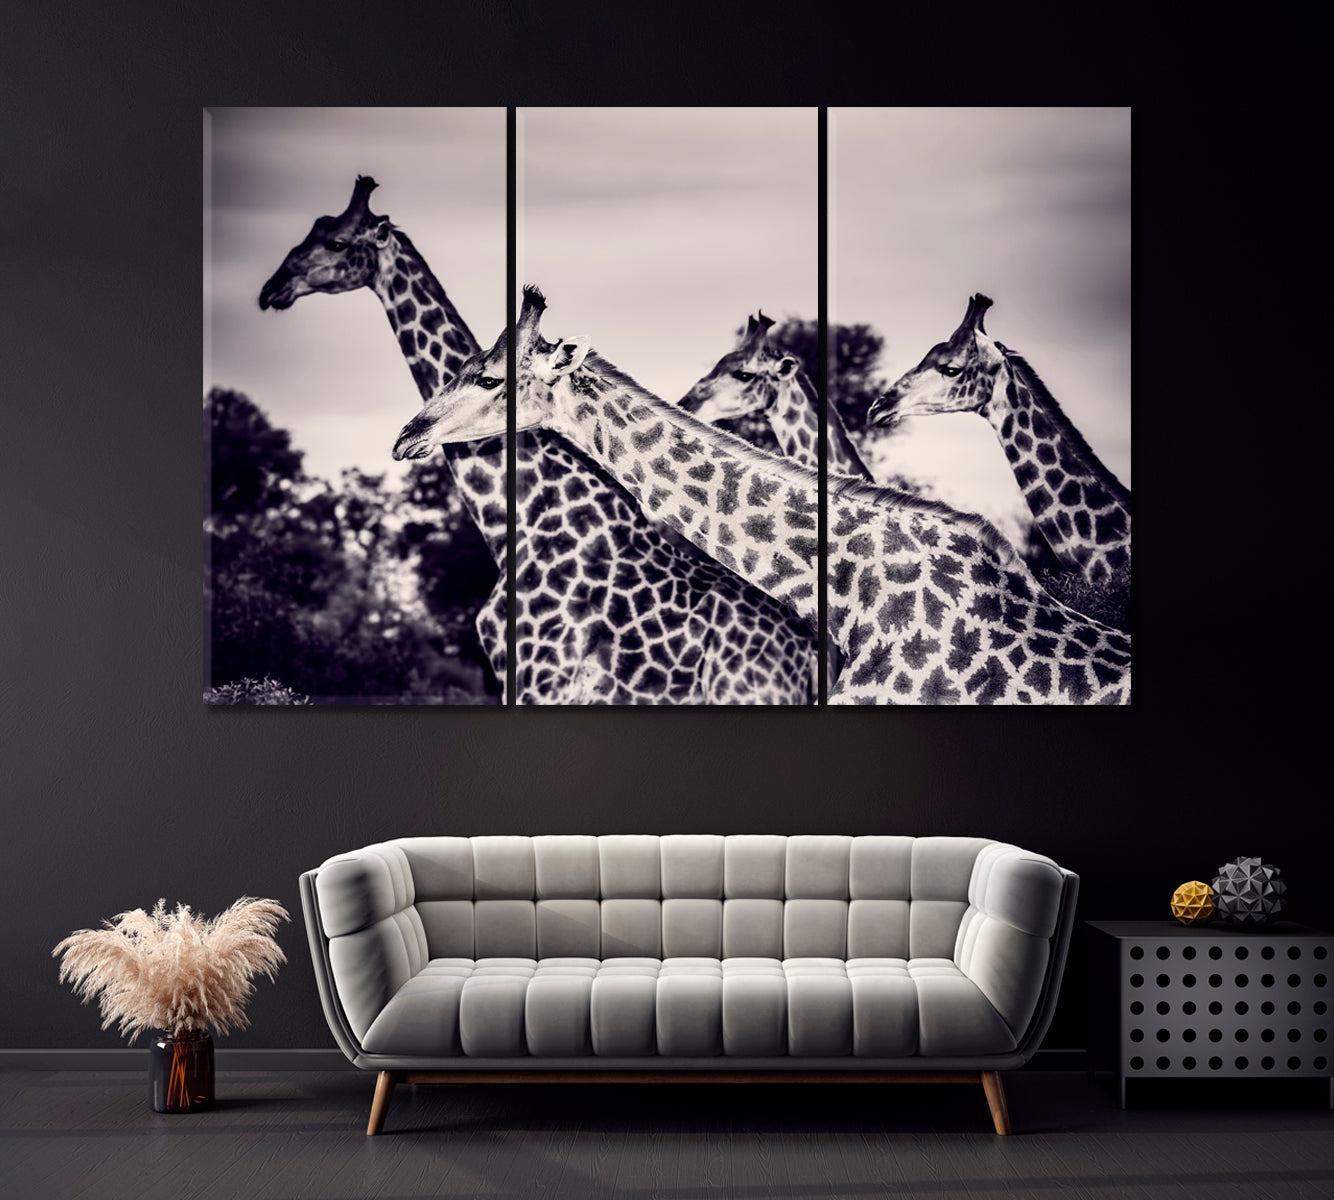 Giraffes in Black and White Canvas Print ArtLexy 3 Panels 36"x24" inches 